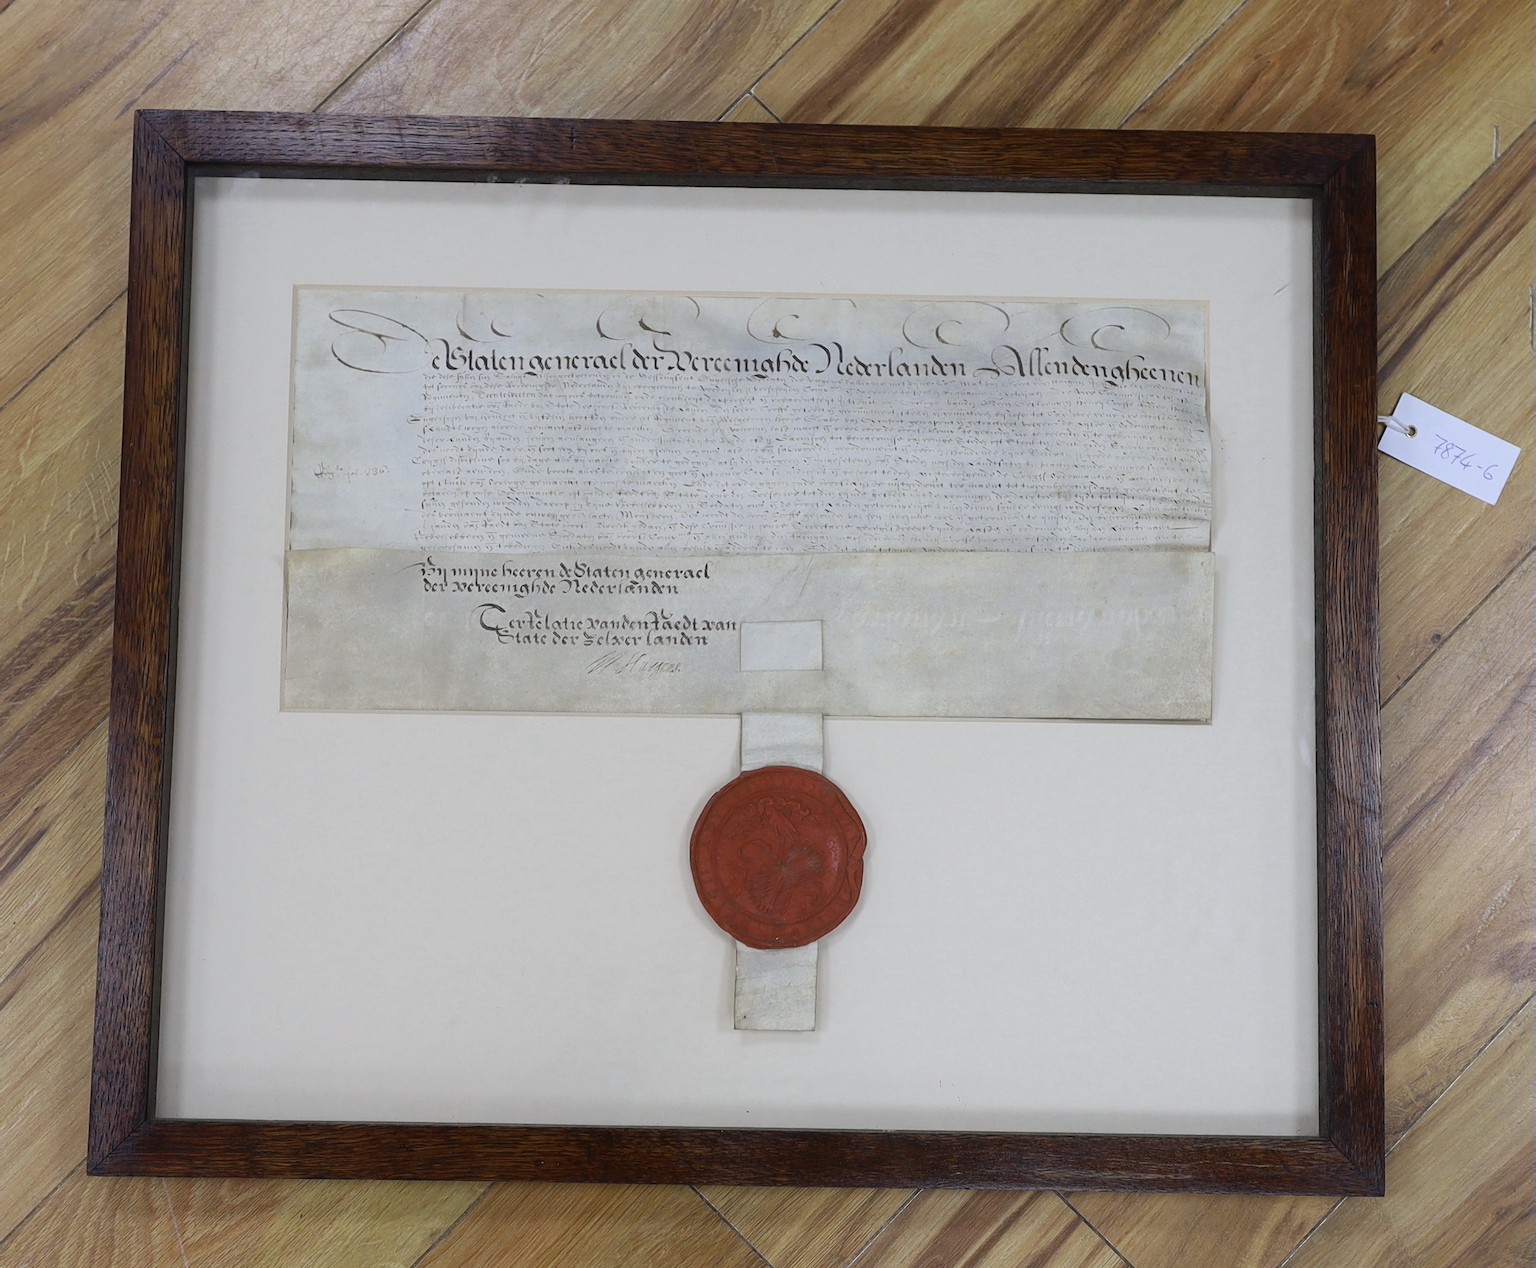 Sealed commission (in Dutch) issued by the States-General of the United Netherlands to Henry Crofts, knight, as a captain in the regiment commanded by Henry de Vere, eighteenth earl of Oxford; The Hague, 28 August 1624